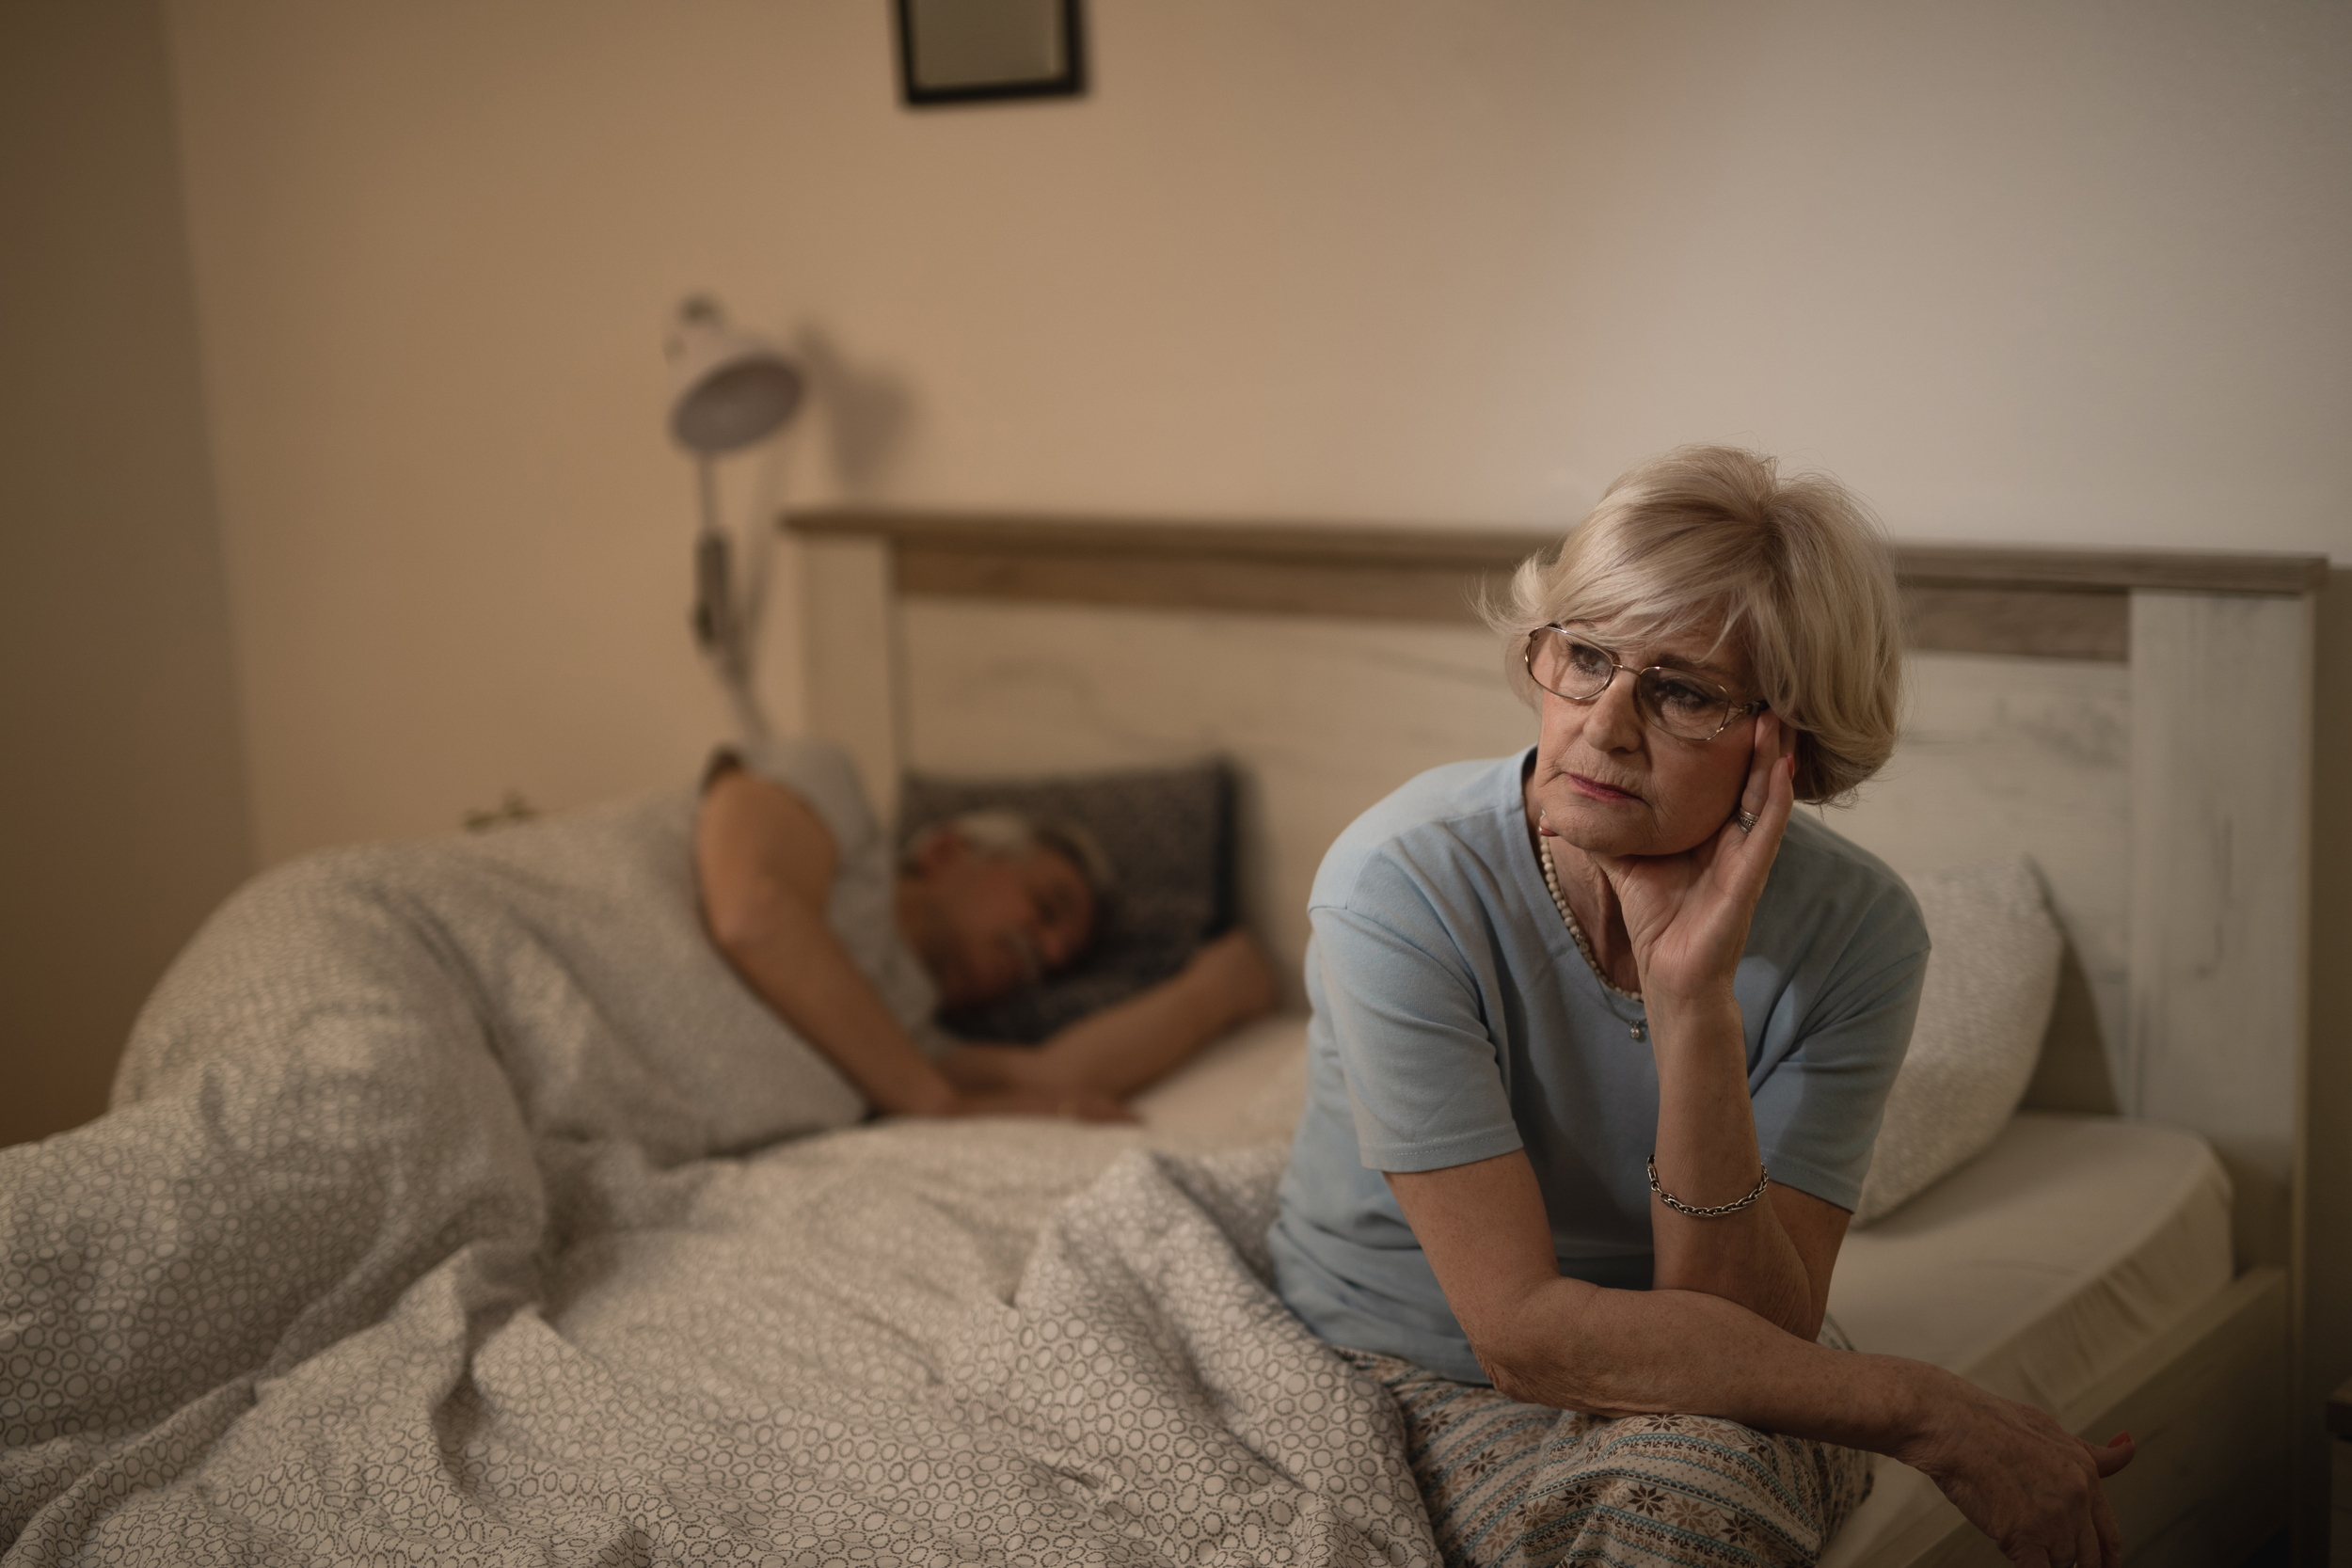 pensive mature woman feeling sleepless and sitting in the bed while her husband is sleeping in the background